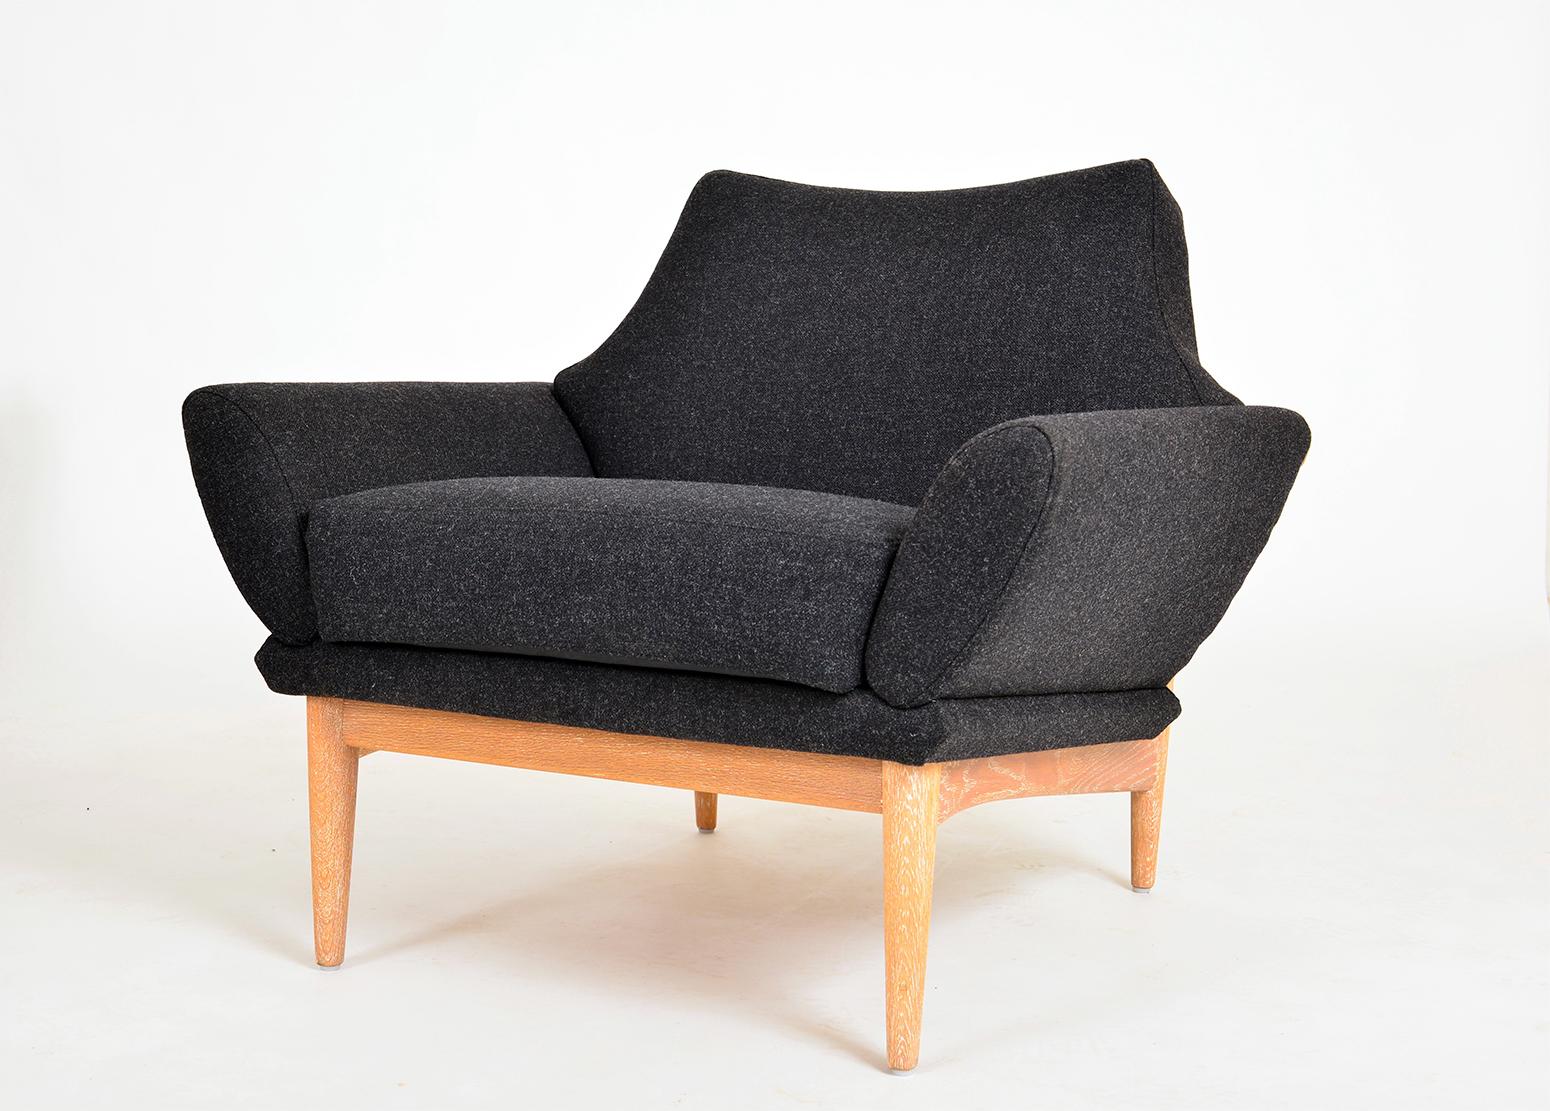 1960s Swedish Curved Sofa & Chair Johannes Andersen Trensums Mid-Century Modern For Sale 10